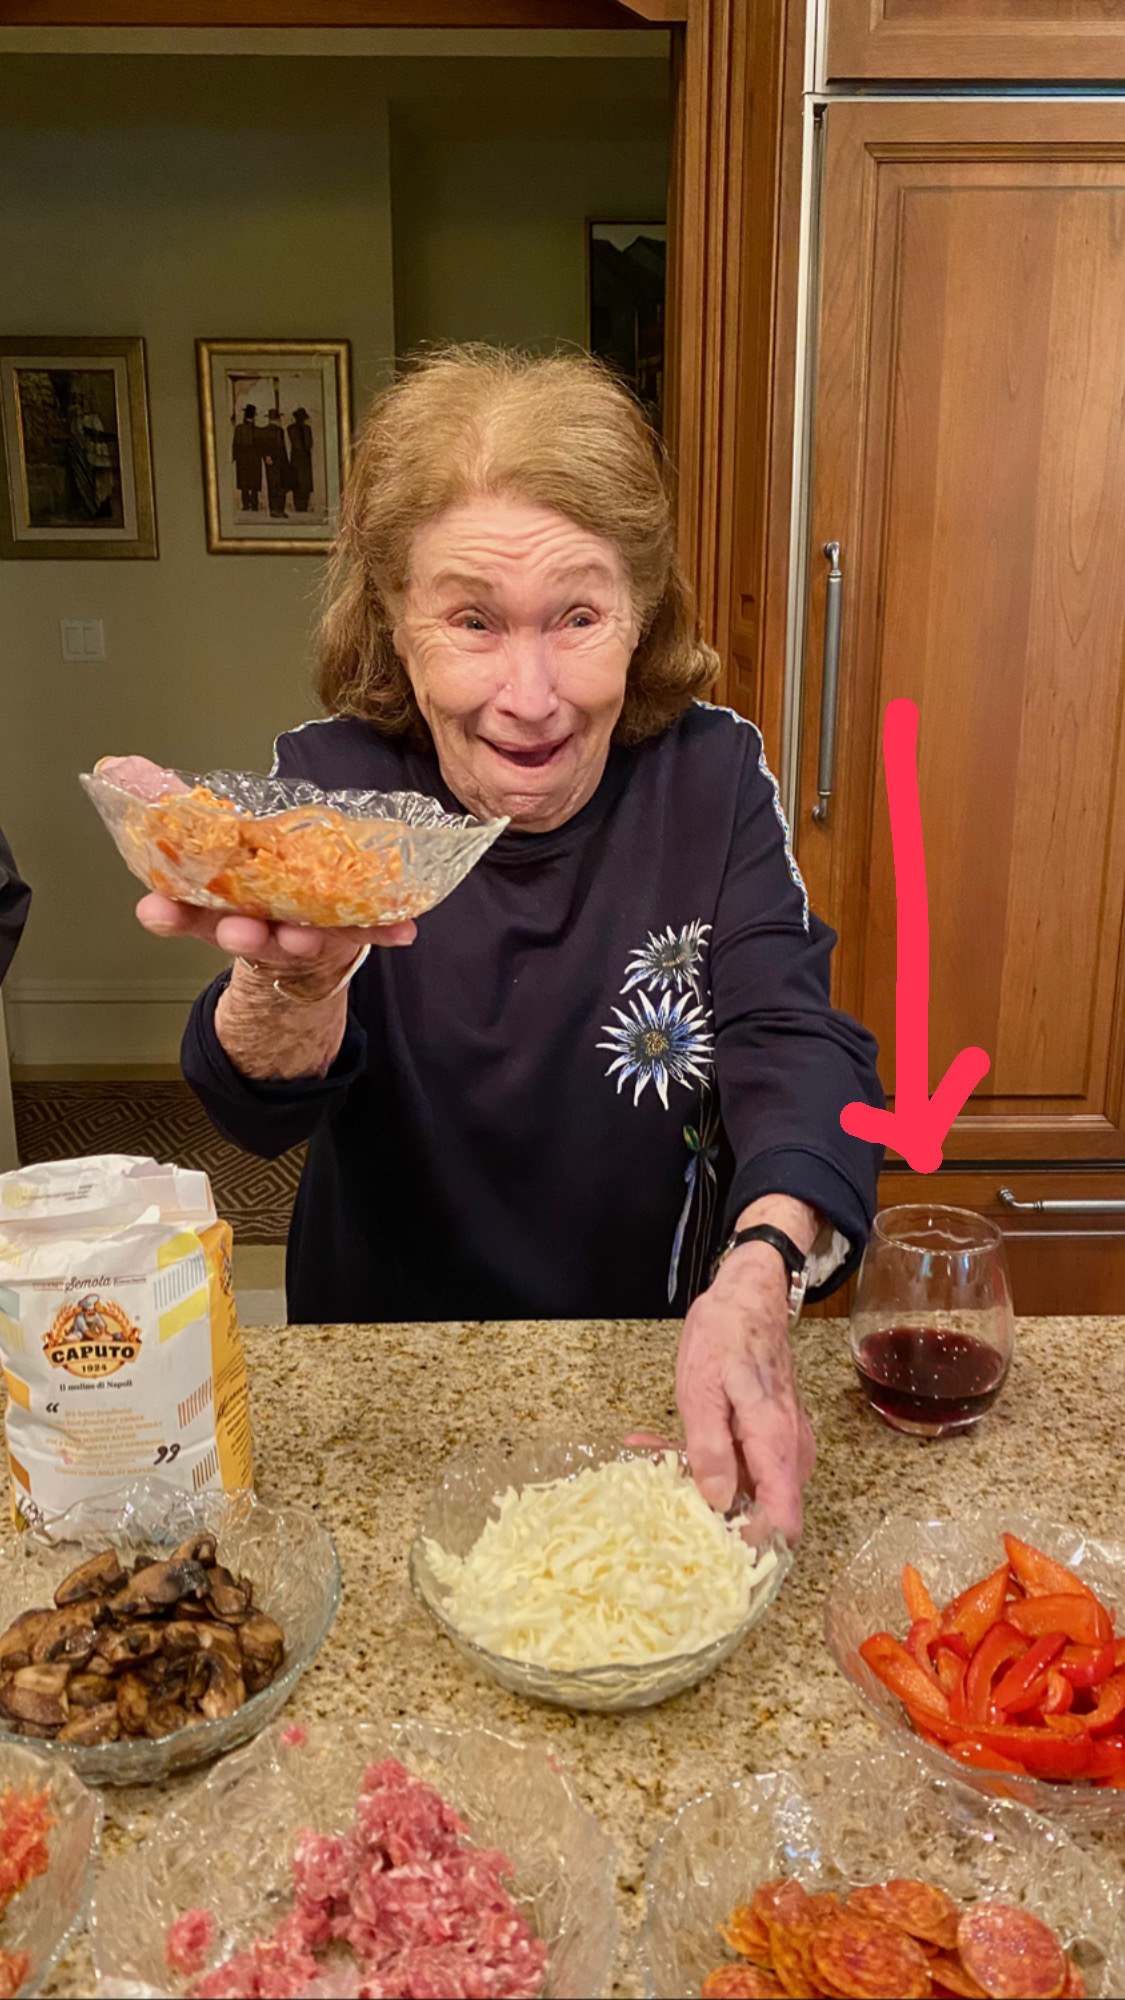 Grandma observing the various pizza toppings